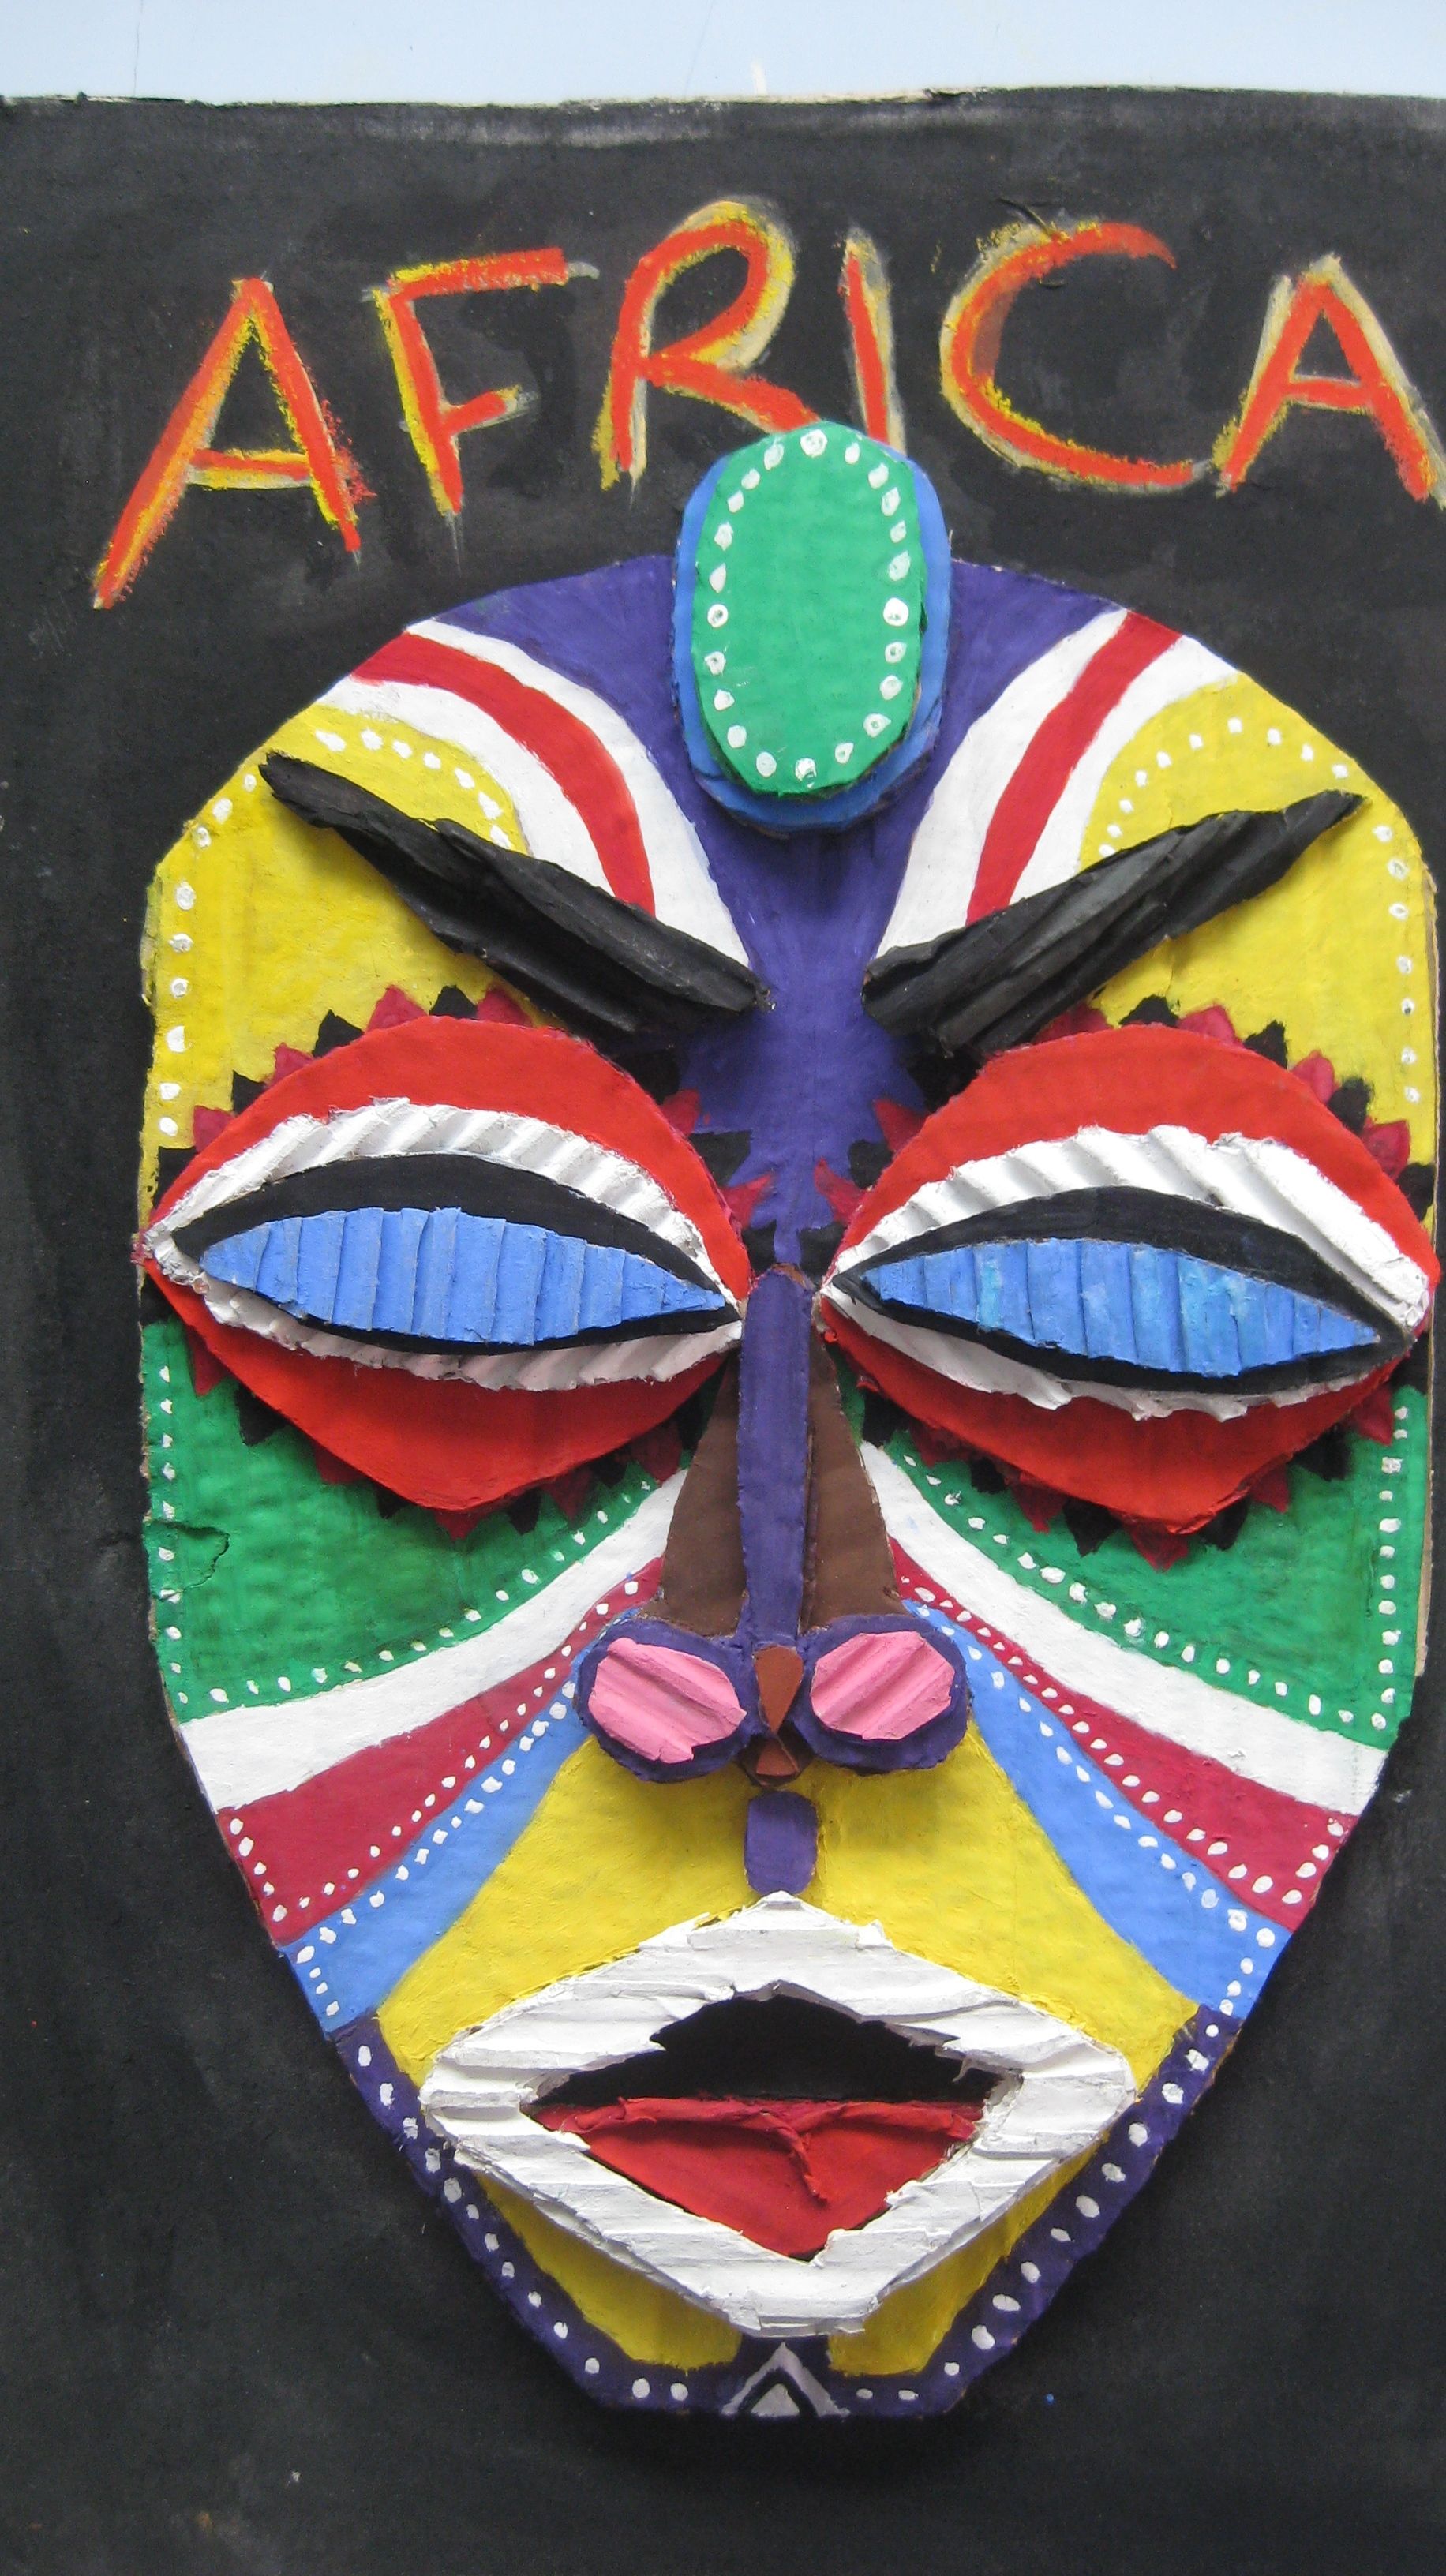 Lovely cardboard mask made from layering of cardboards for theme Africa